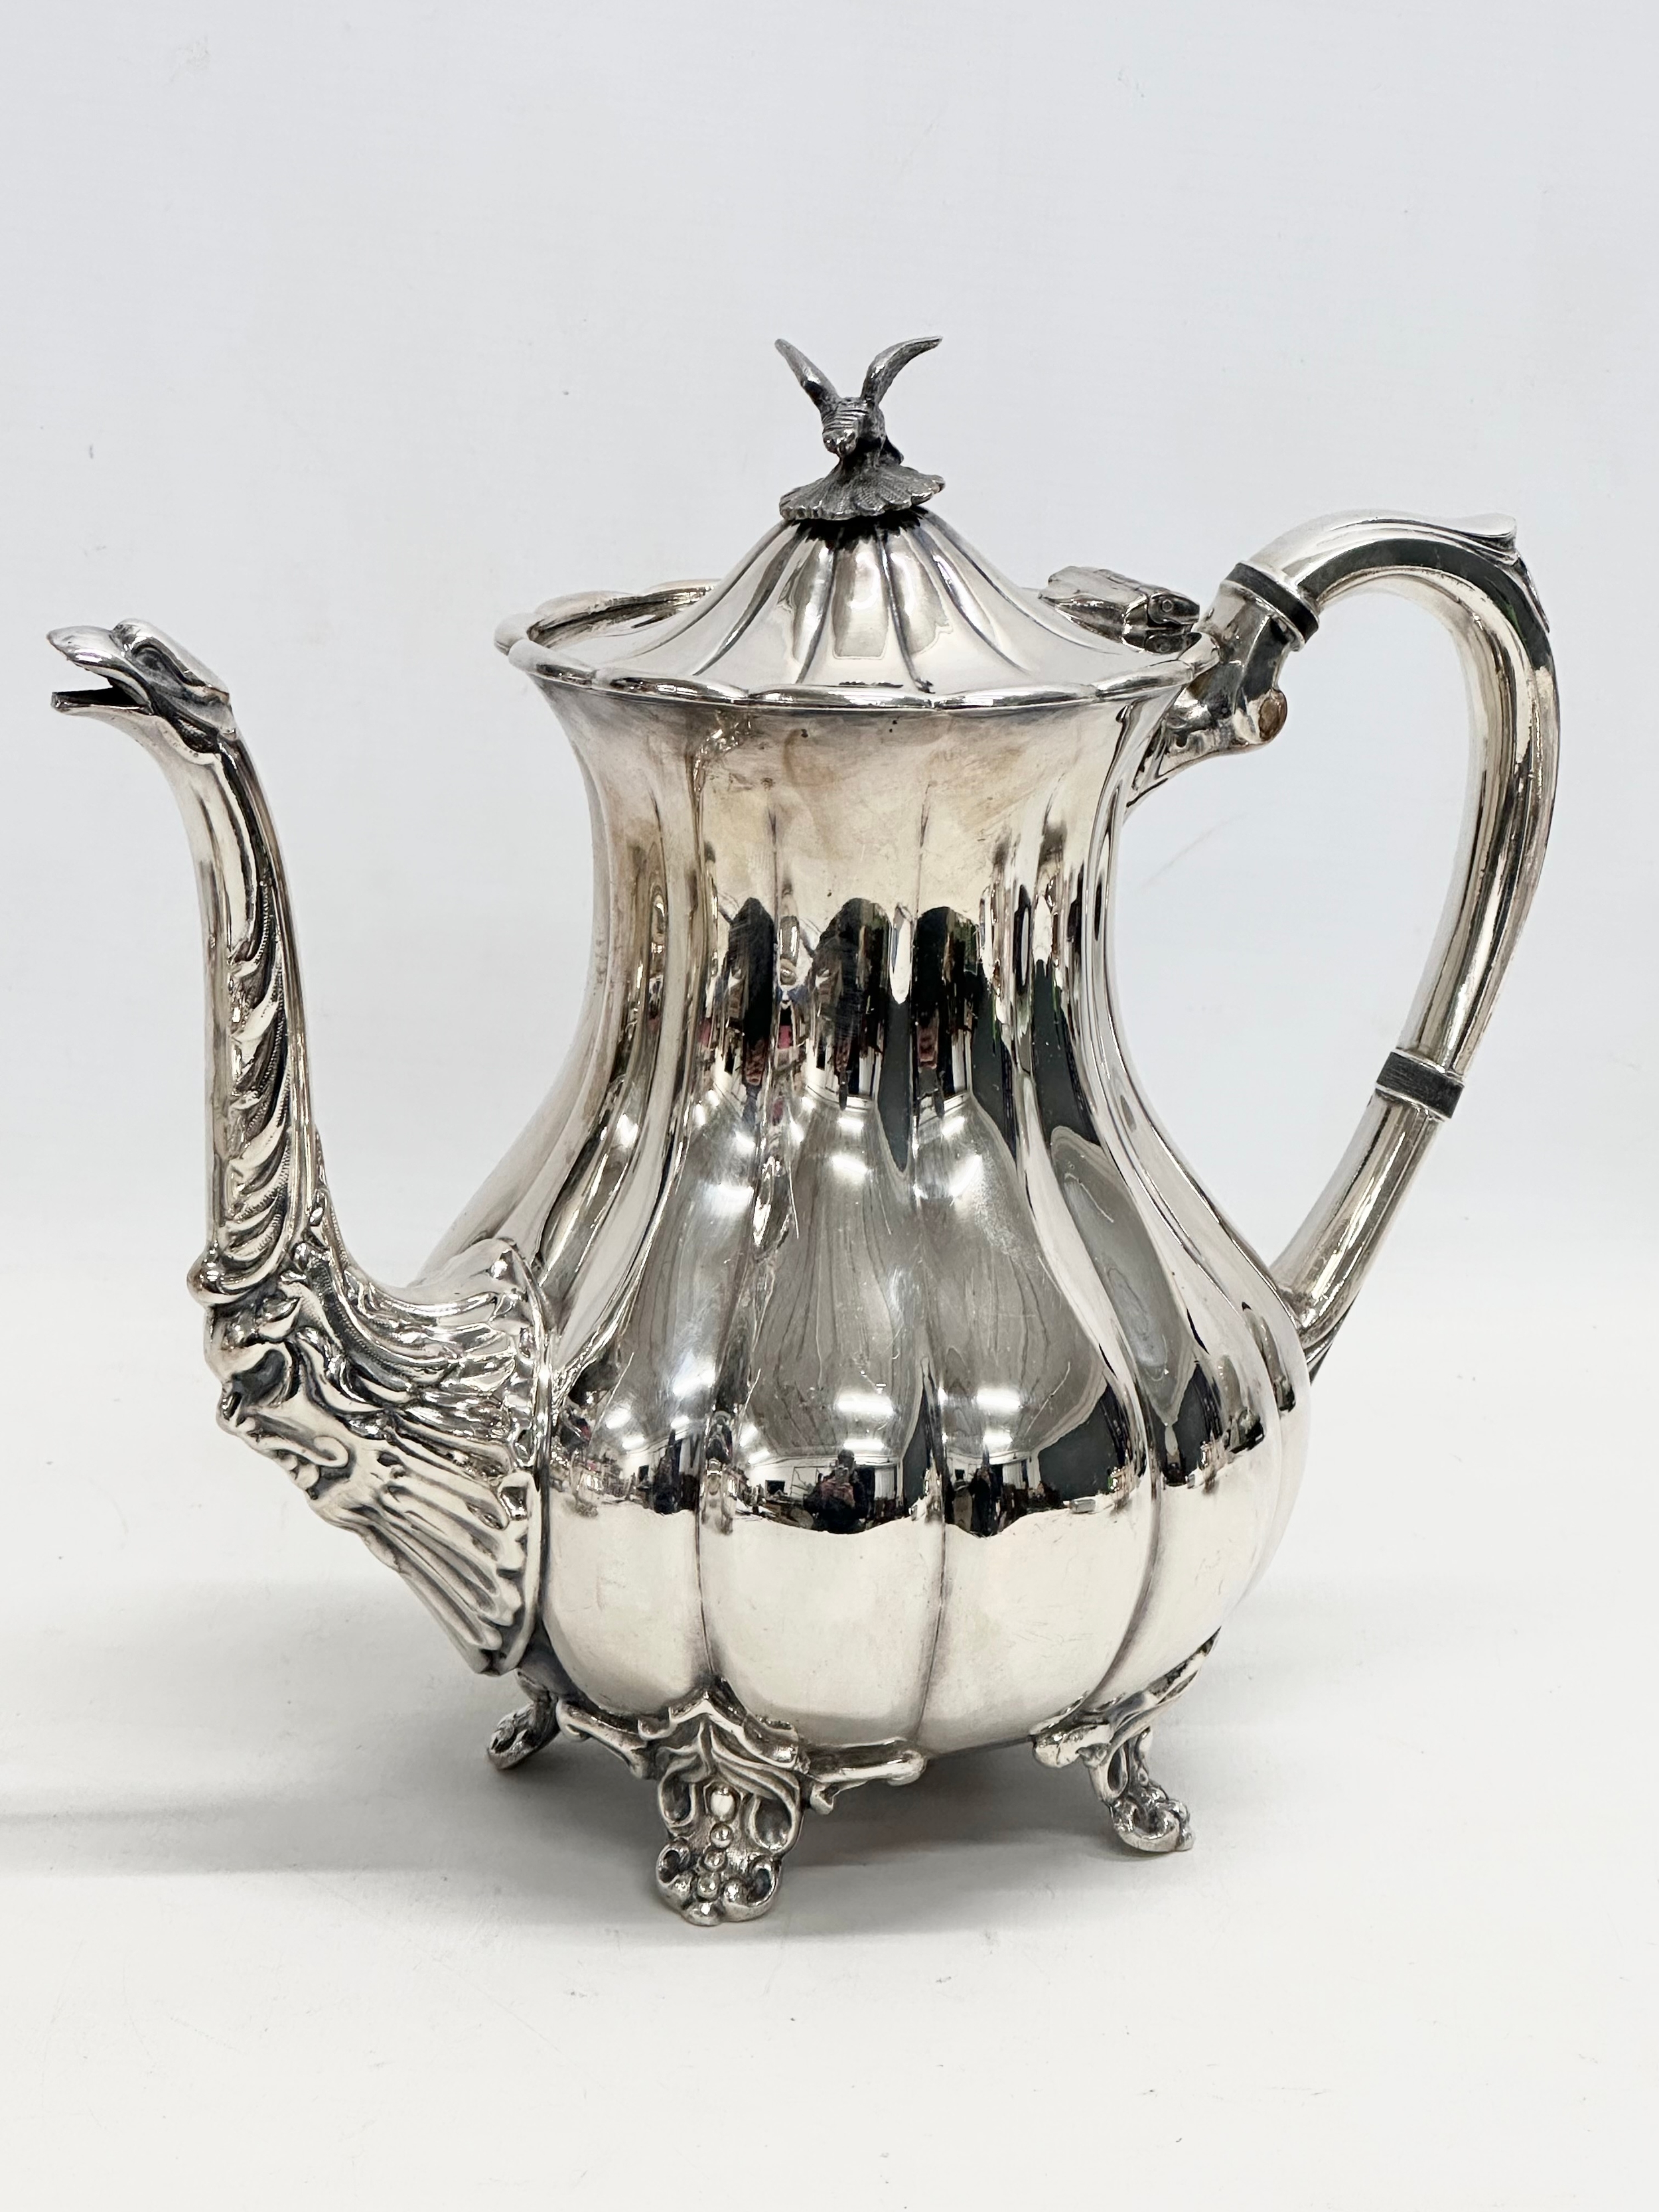 A 4 piece Georgian style silver plated tea service by Cooper Brothers. - Image 2 of 5